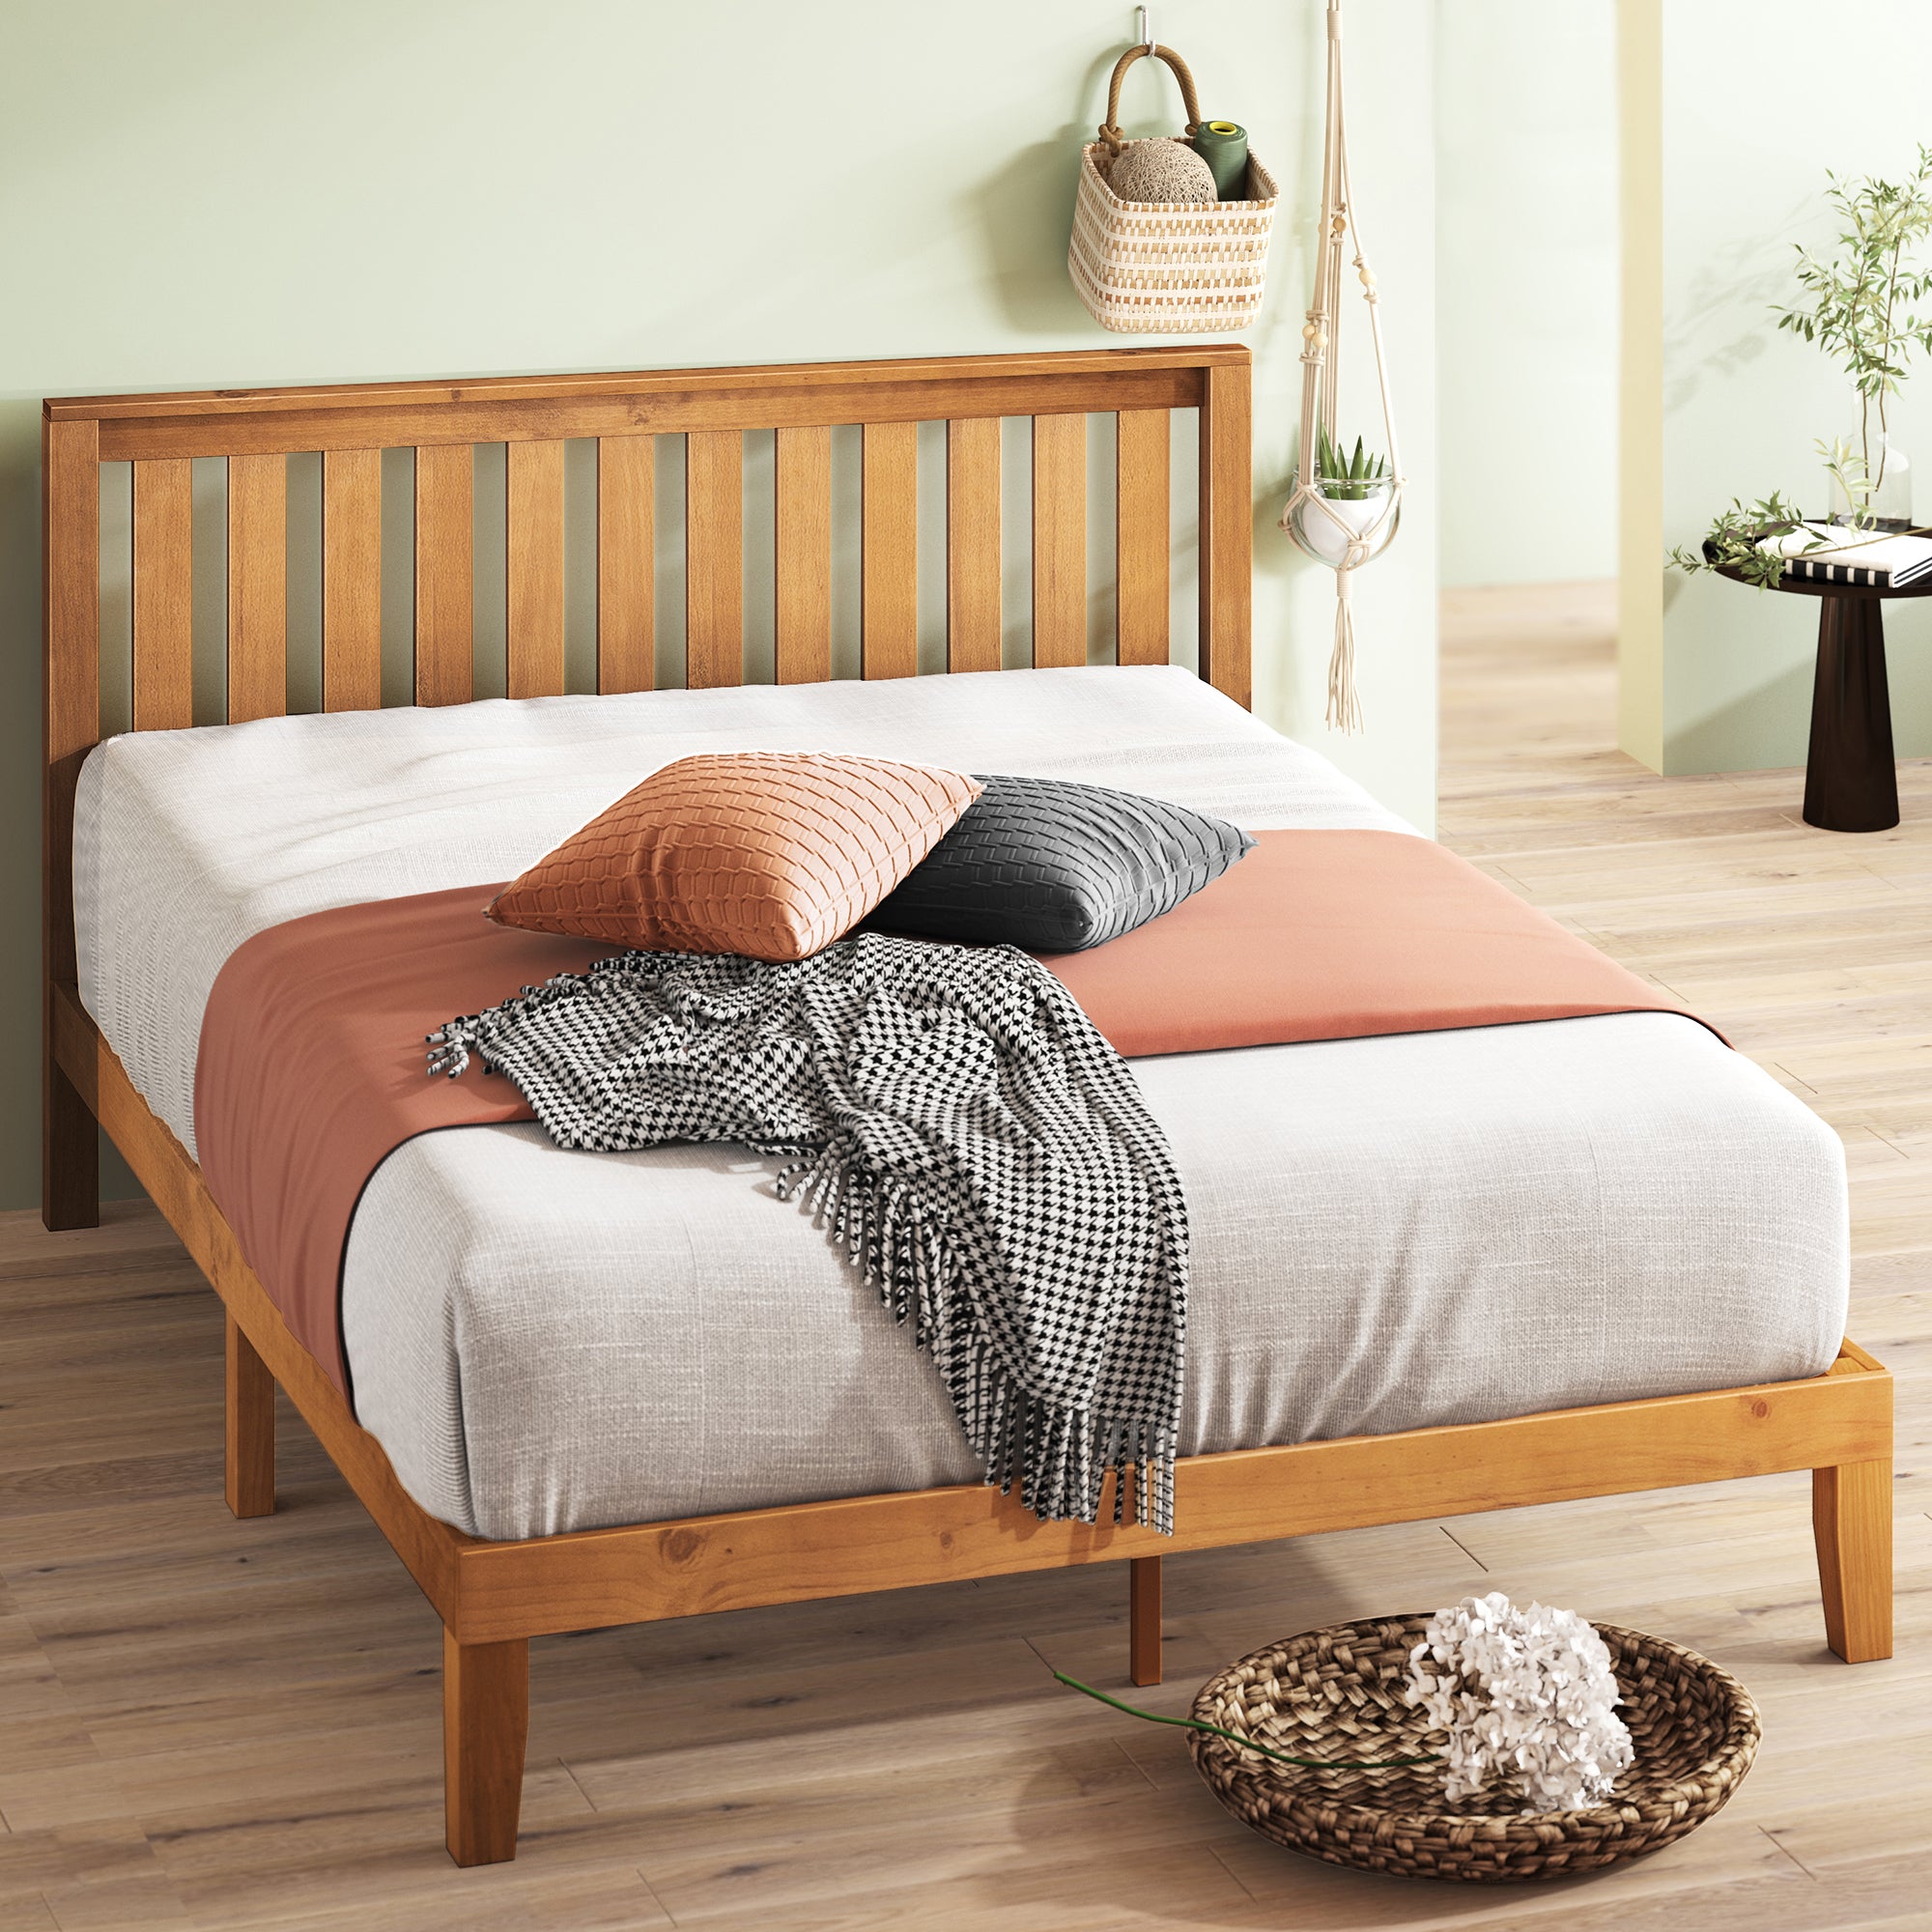 Alexia Wood Bed Frame with Headboard